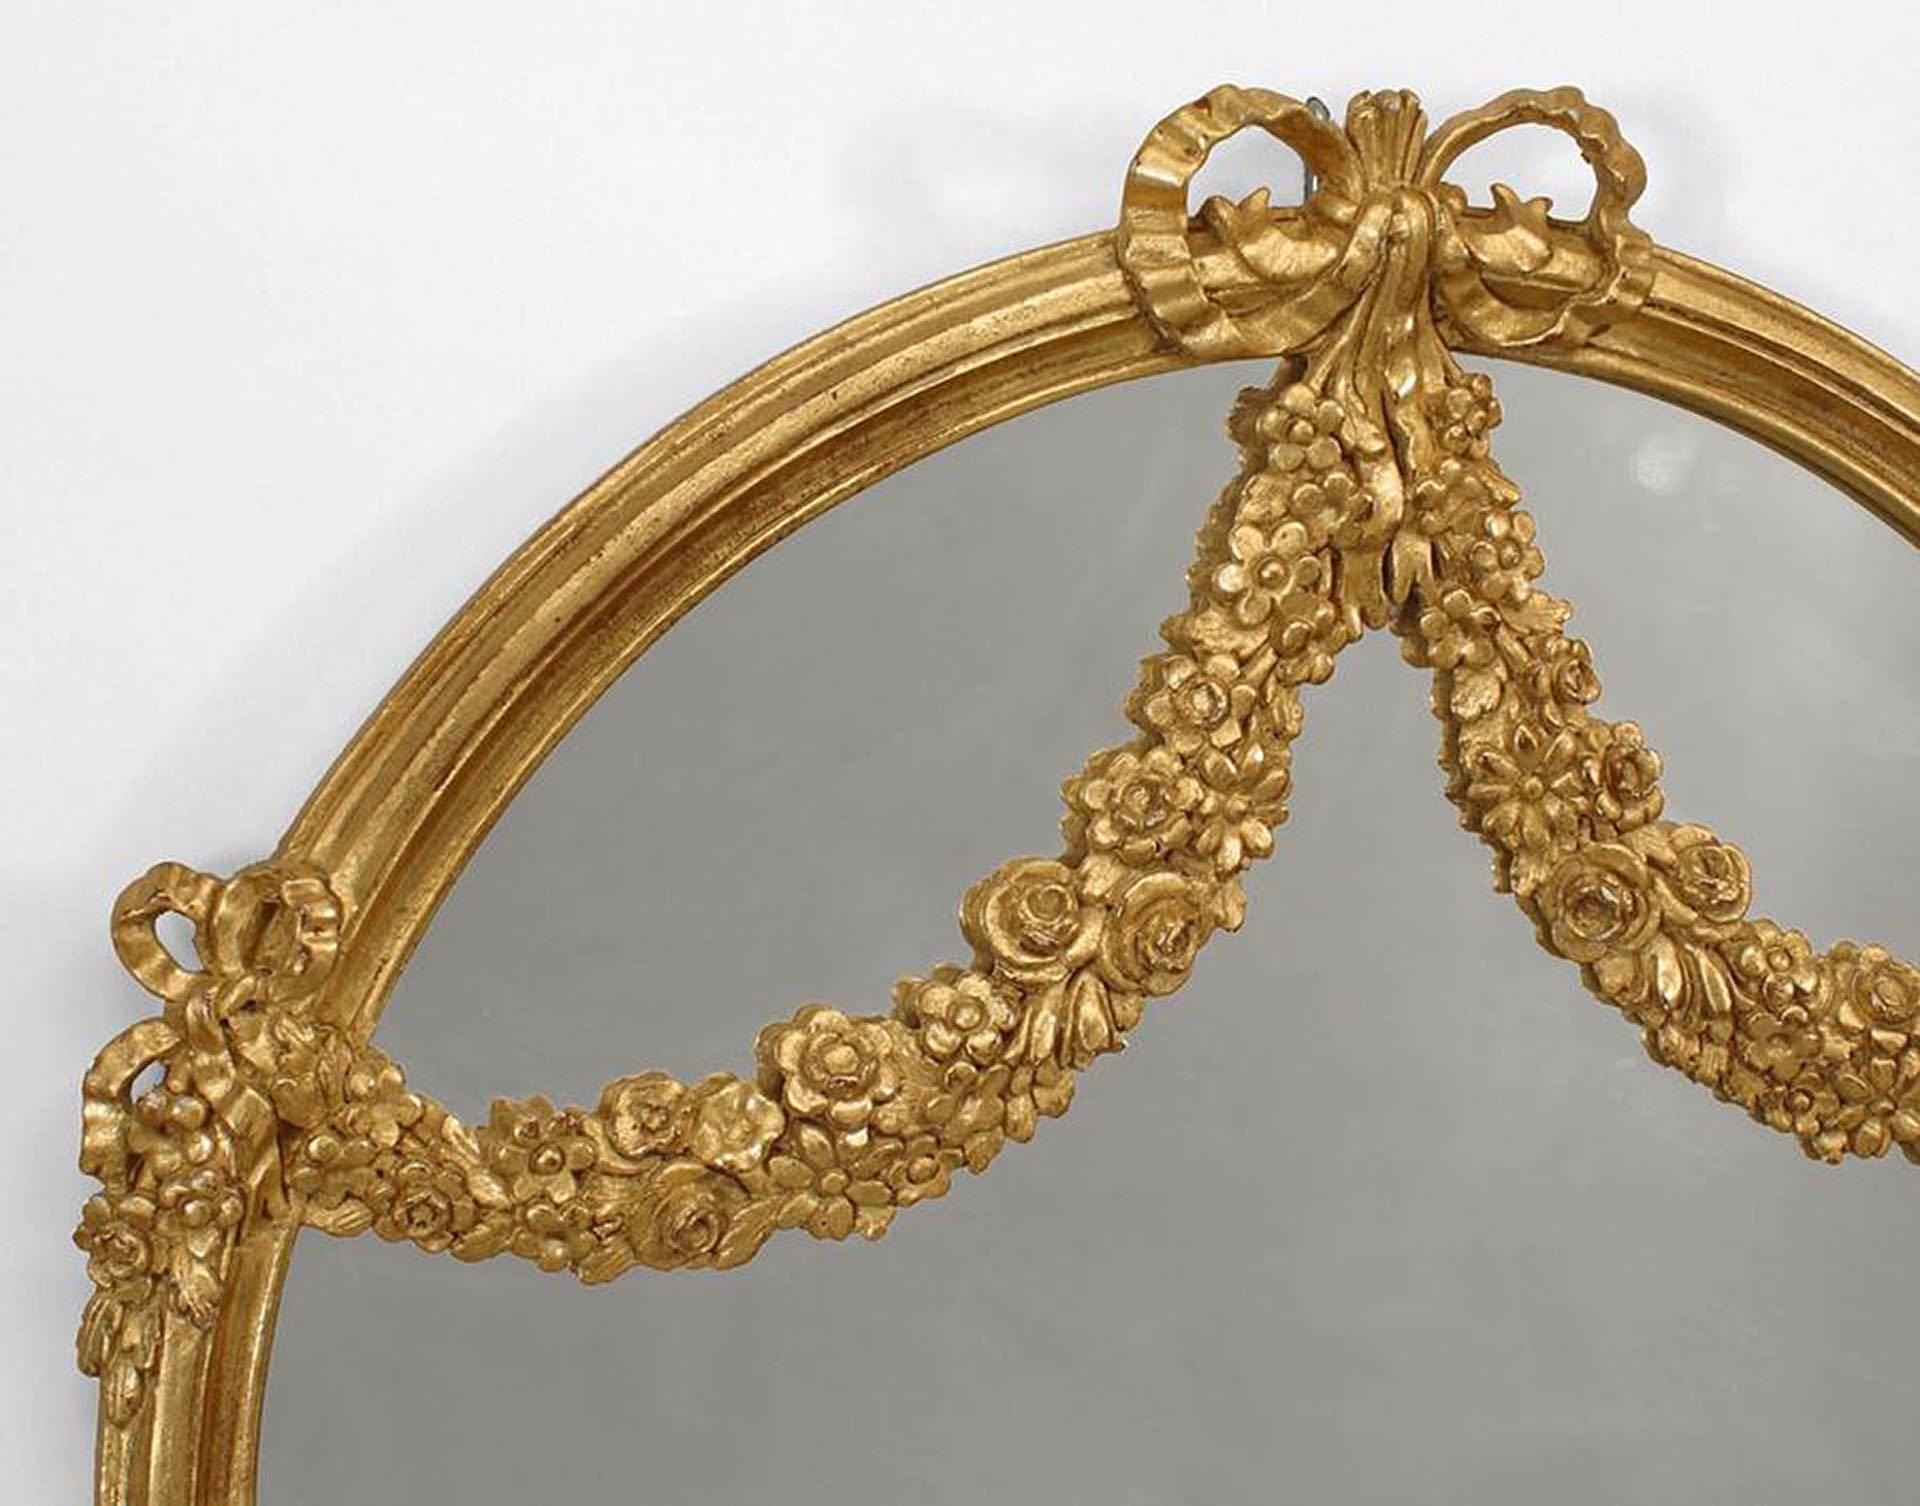 French Louis XVI-style (20th Century) giltwood wall mirror with two carved floral swags and arch design top with a bow knot.
